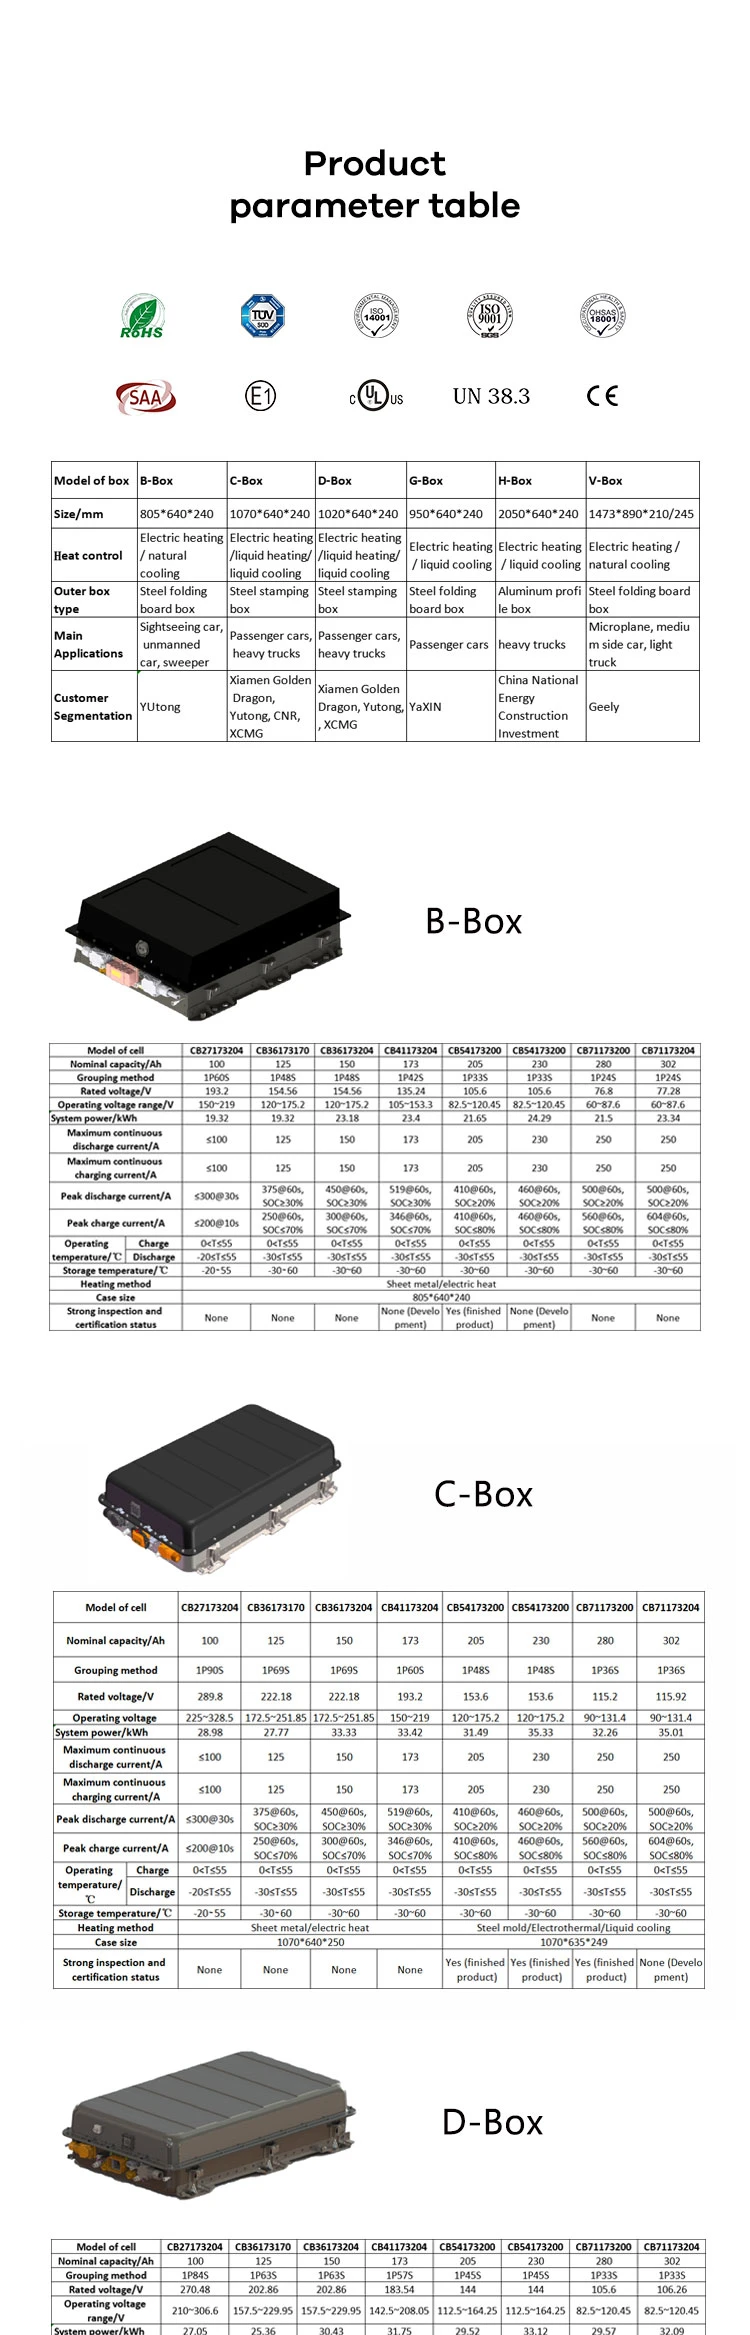 222.18V 125ah (125Ah 1P69S) LiFePO4 (LFP) Lithium Battery Pack Storage C Box Battery for Electric Vehicle Power Supply Bank Mining Trucks